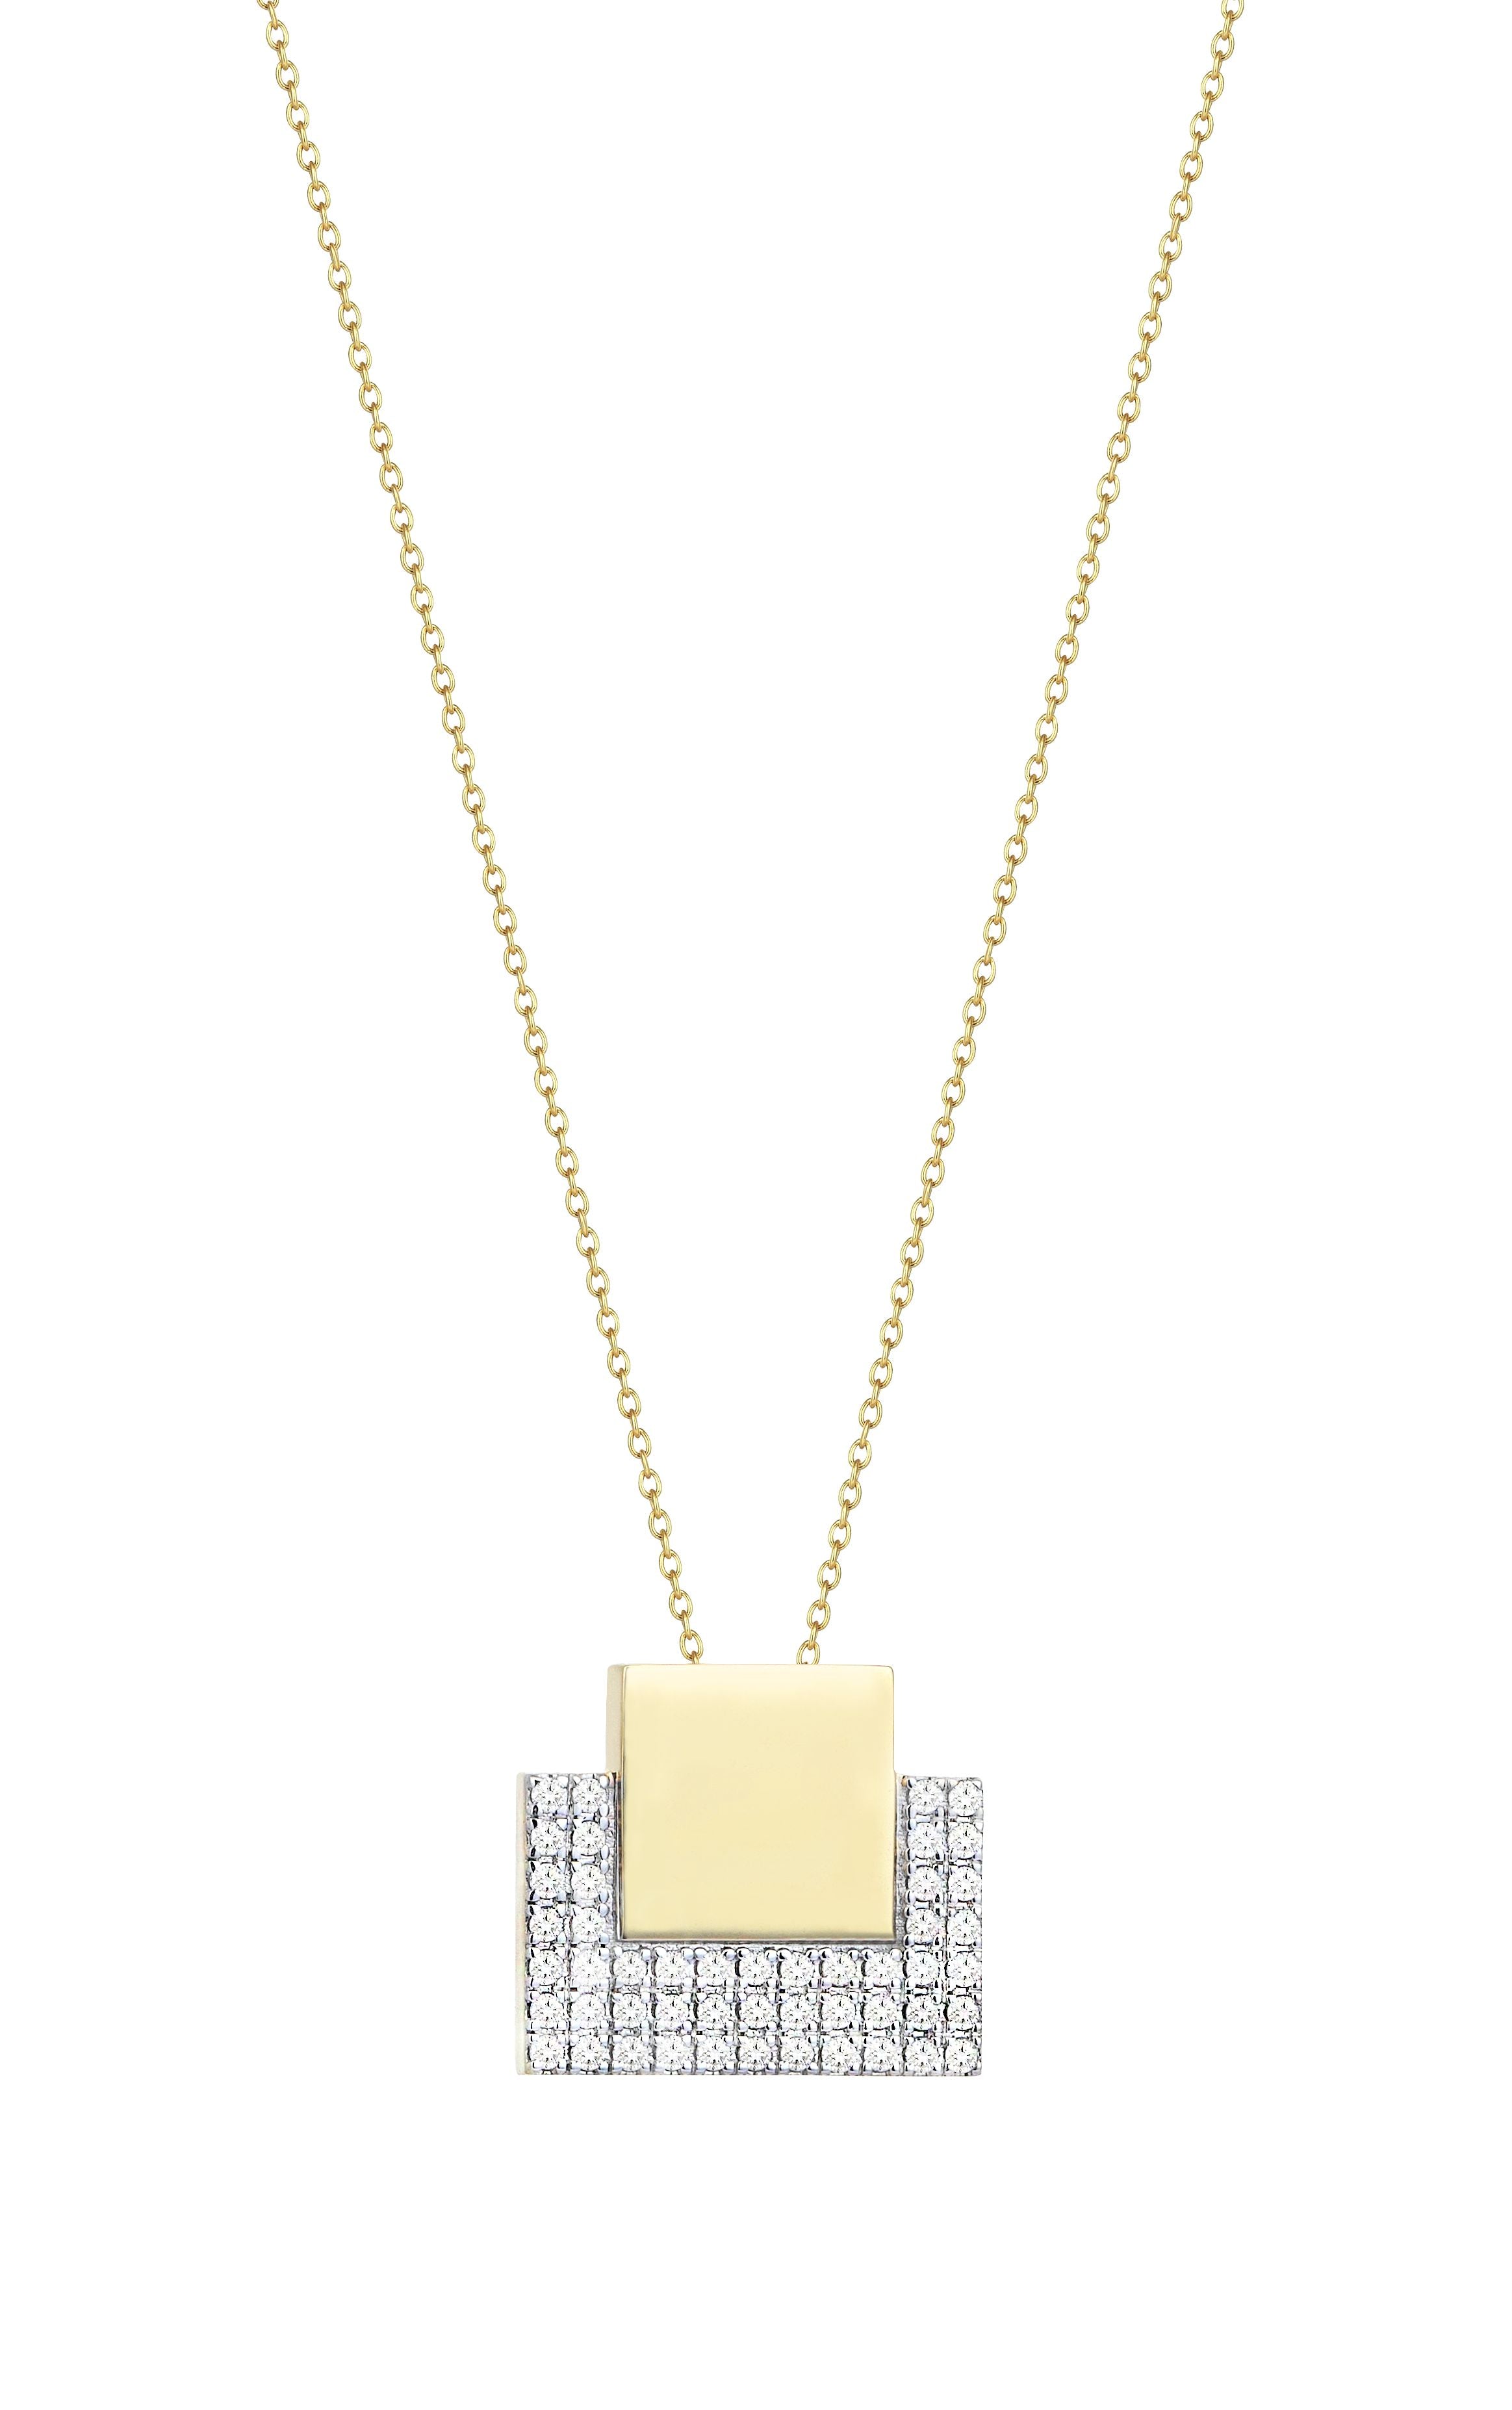 Pave Purse Necklace in Yellow Gold - Her Story Shop